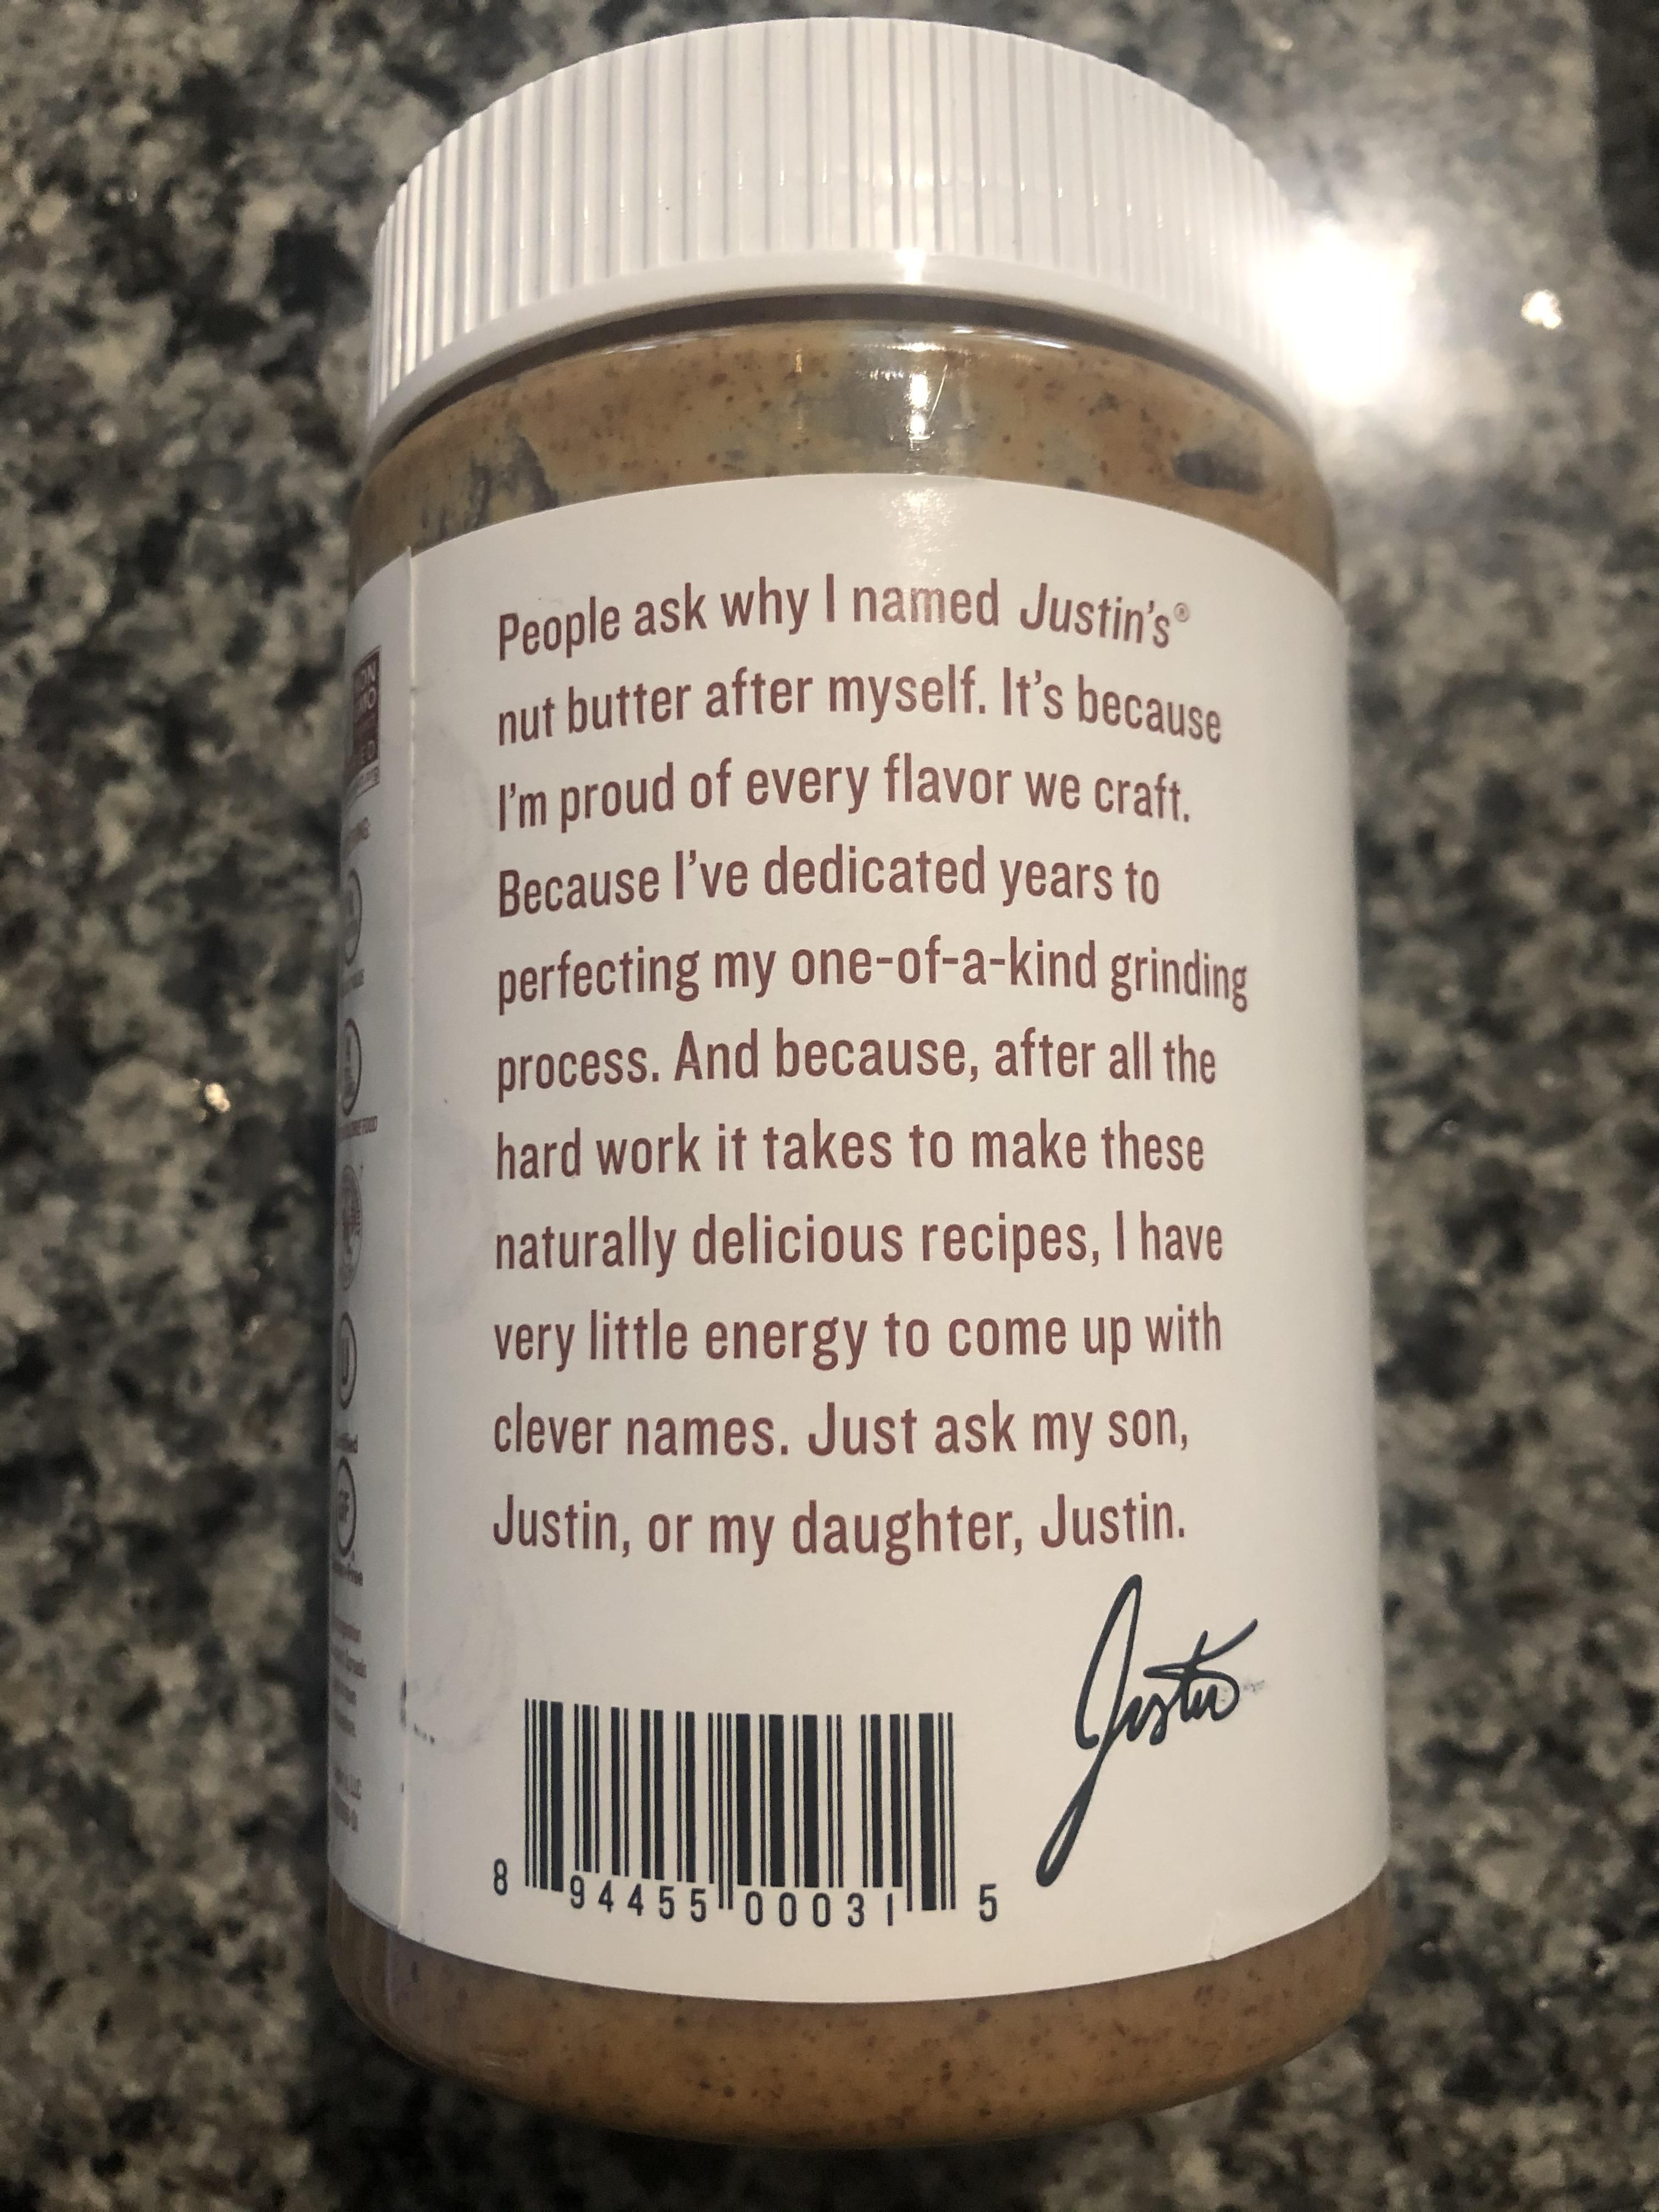 Never read the Justin’s Almond Butter label before...